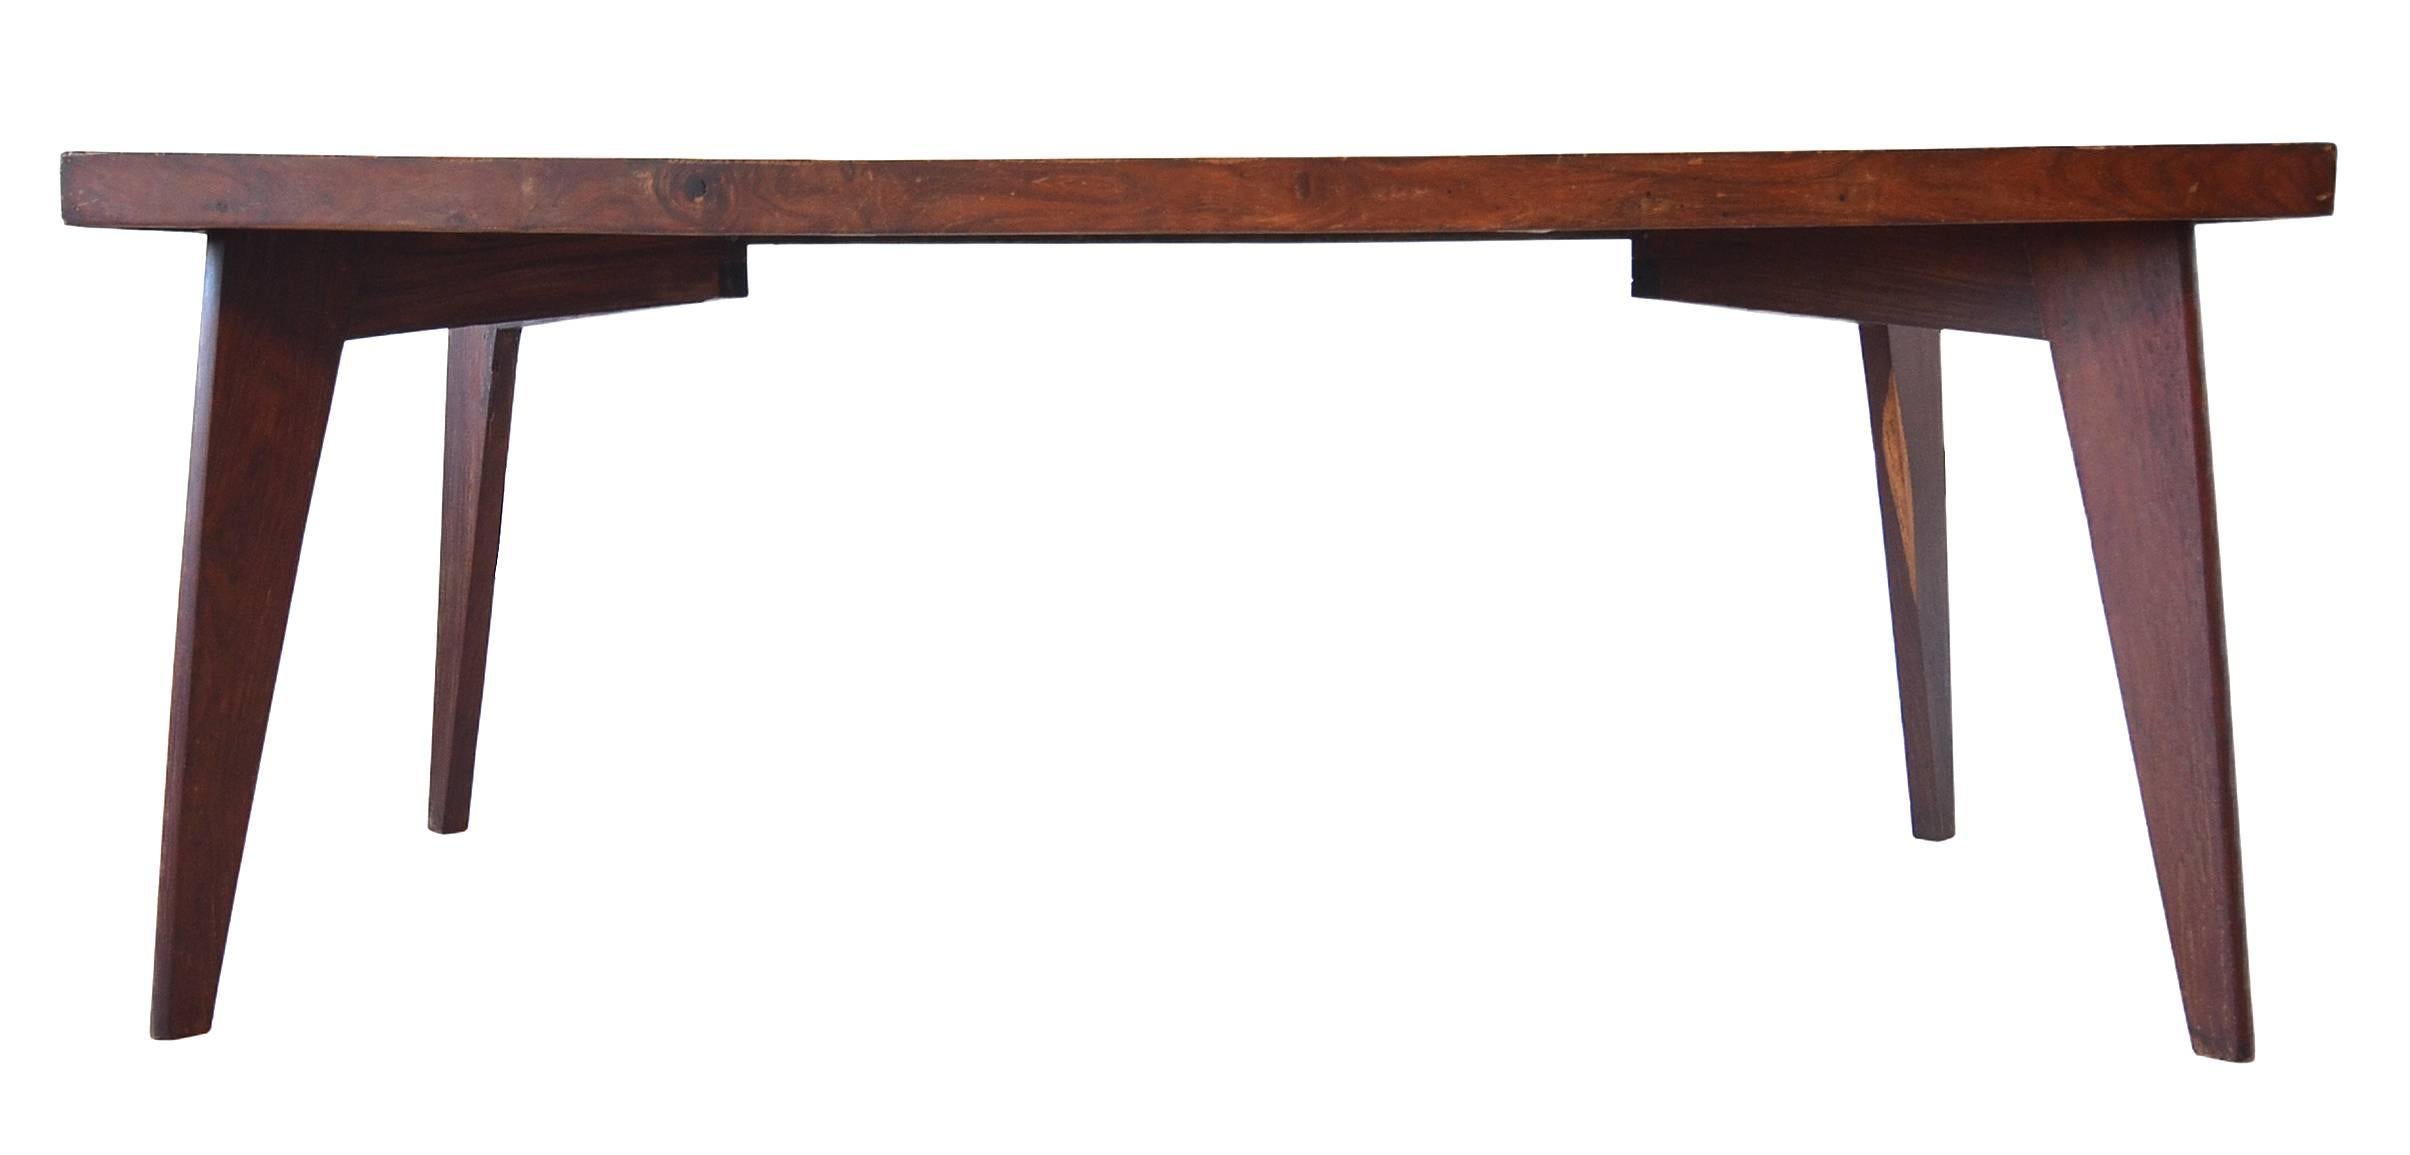 A very special early example of the dining table designed by Pierre Jeanneret for the Chandigarh Project. 

This is model: PJ-TA-01-A.
Categorized as a dining table. 

This table is made from solid Sissoo rosewood with a stunning cathedral